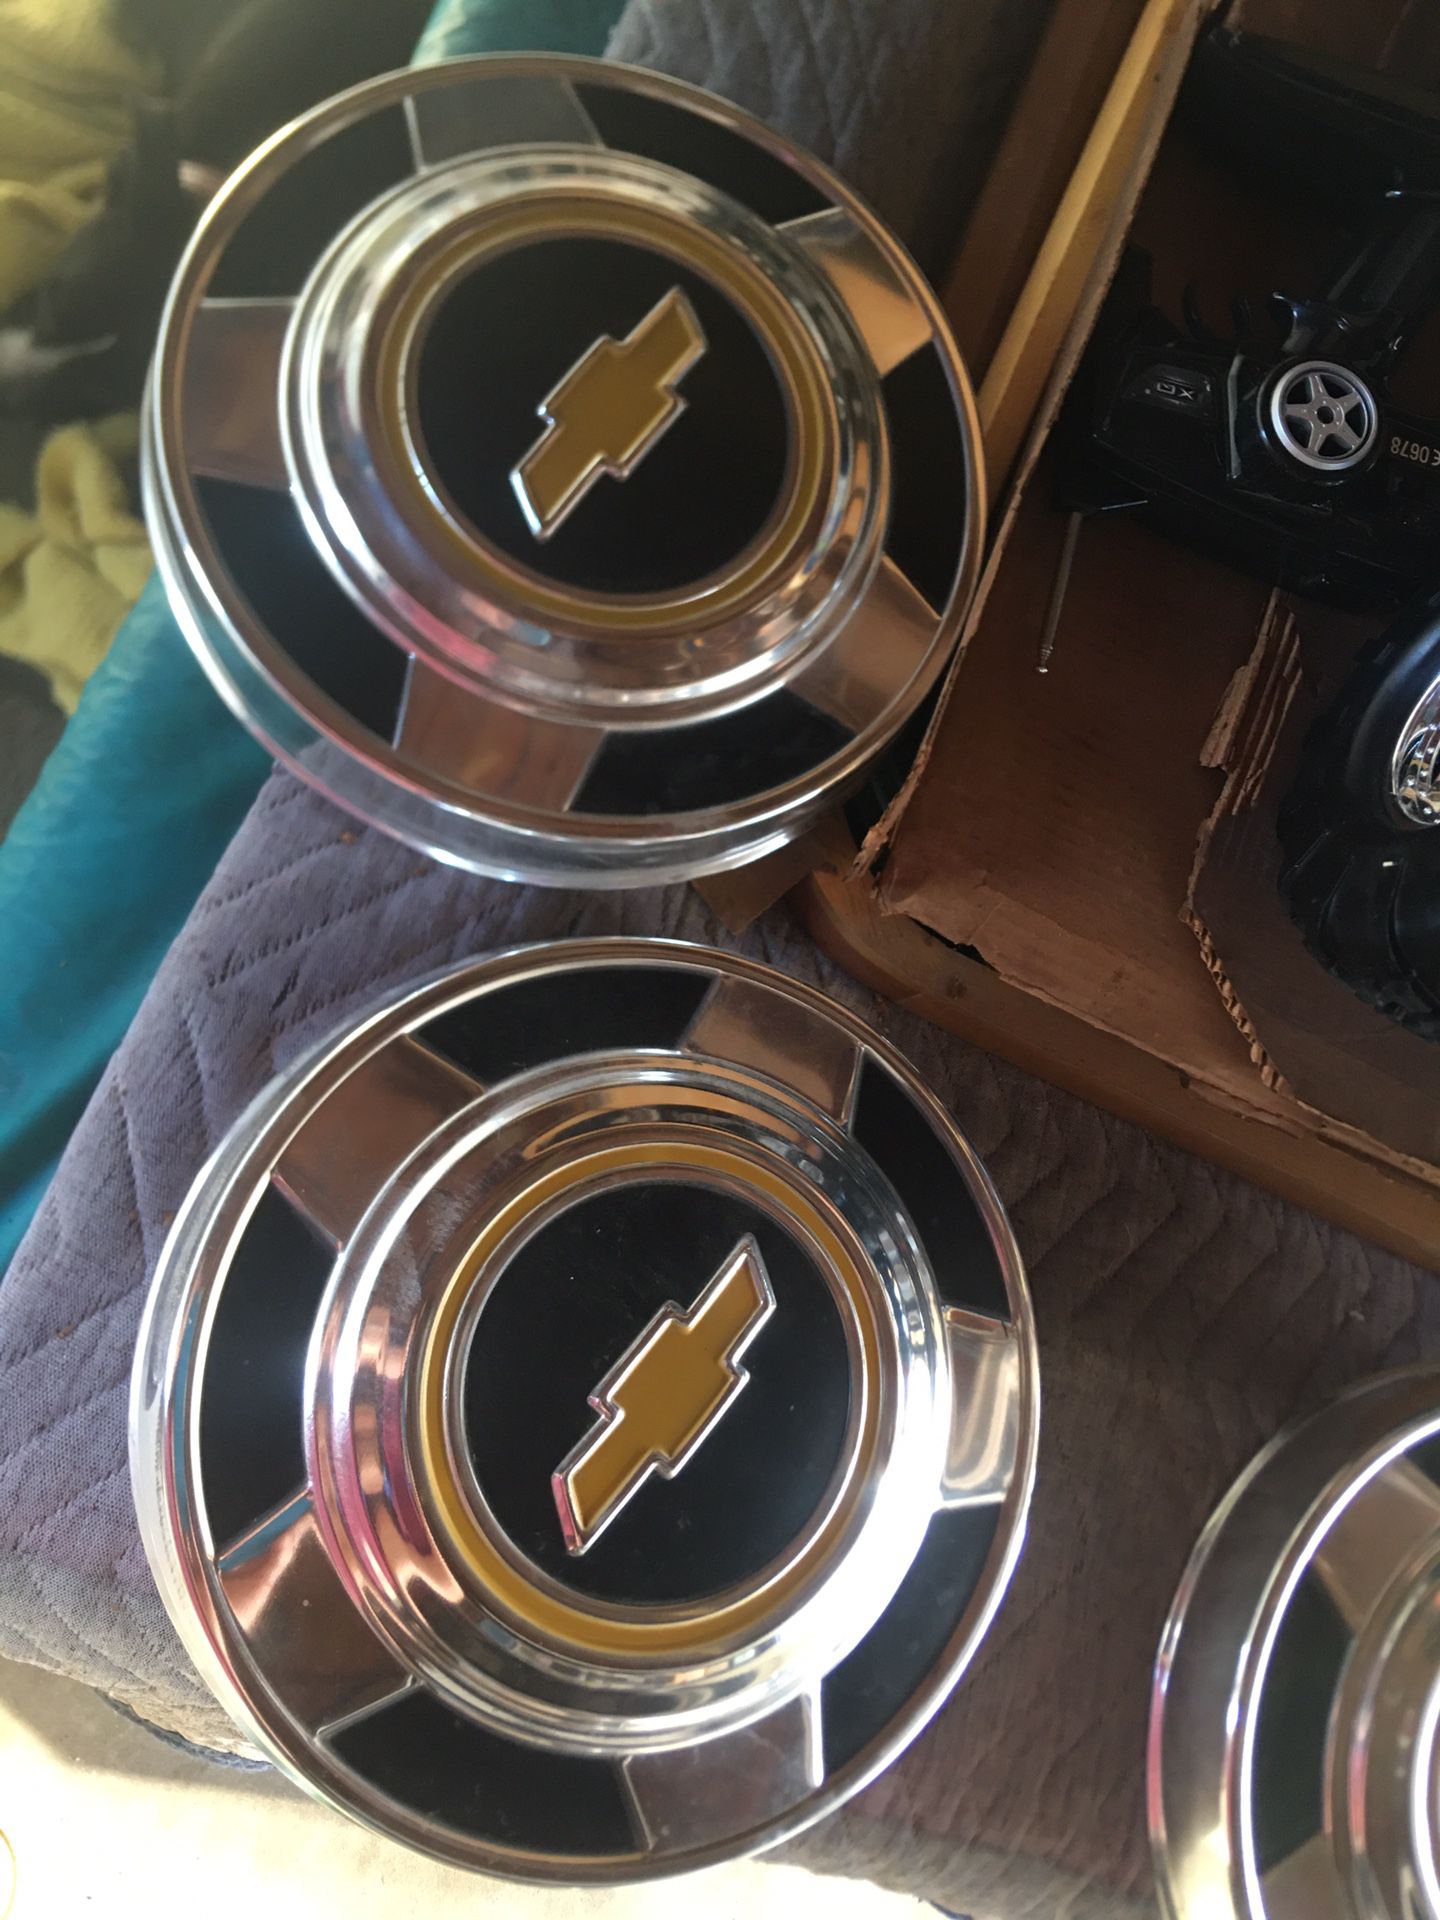 1976 Chevy truck hubcaps , parts ( price is negotiable)